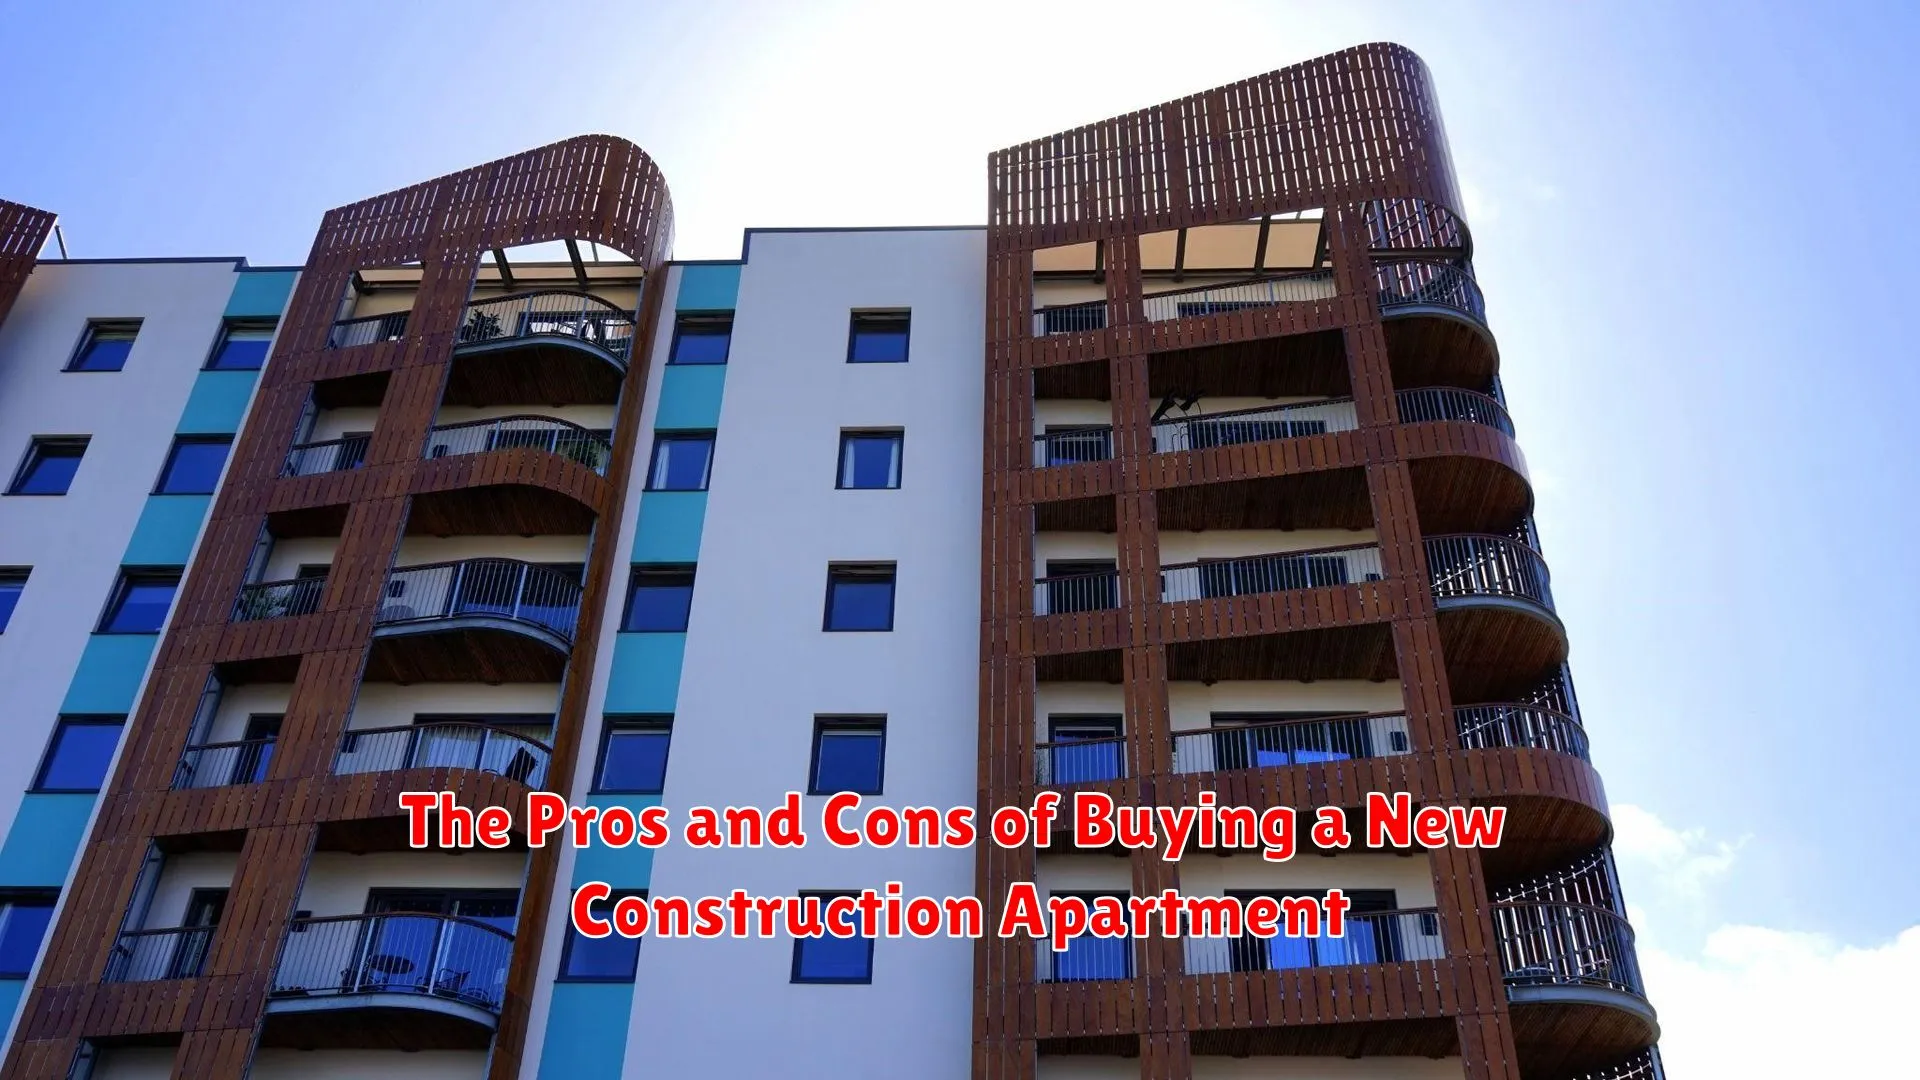 The Pros and Cons of Buying a New Construction Apartment